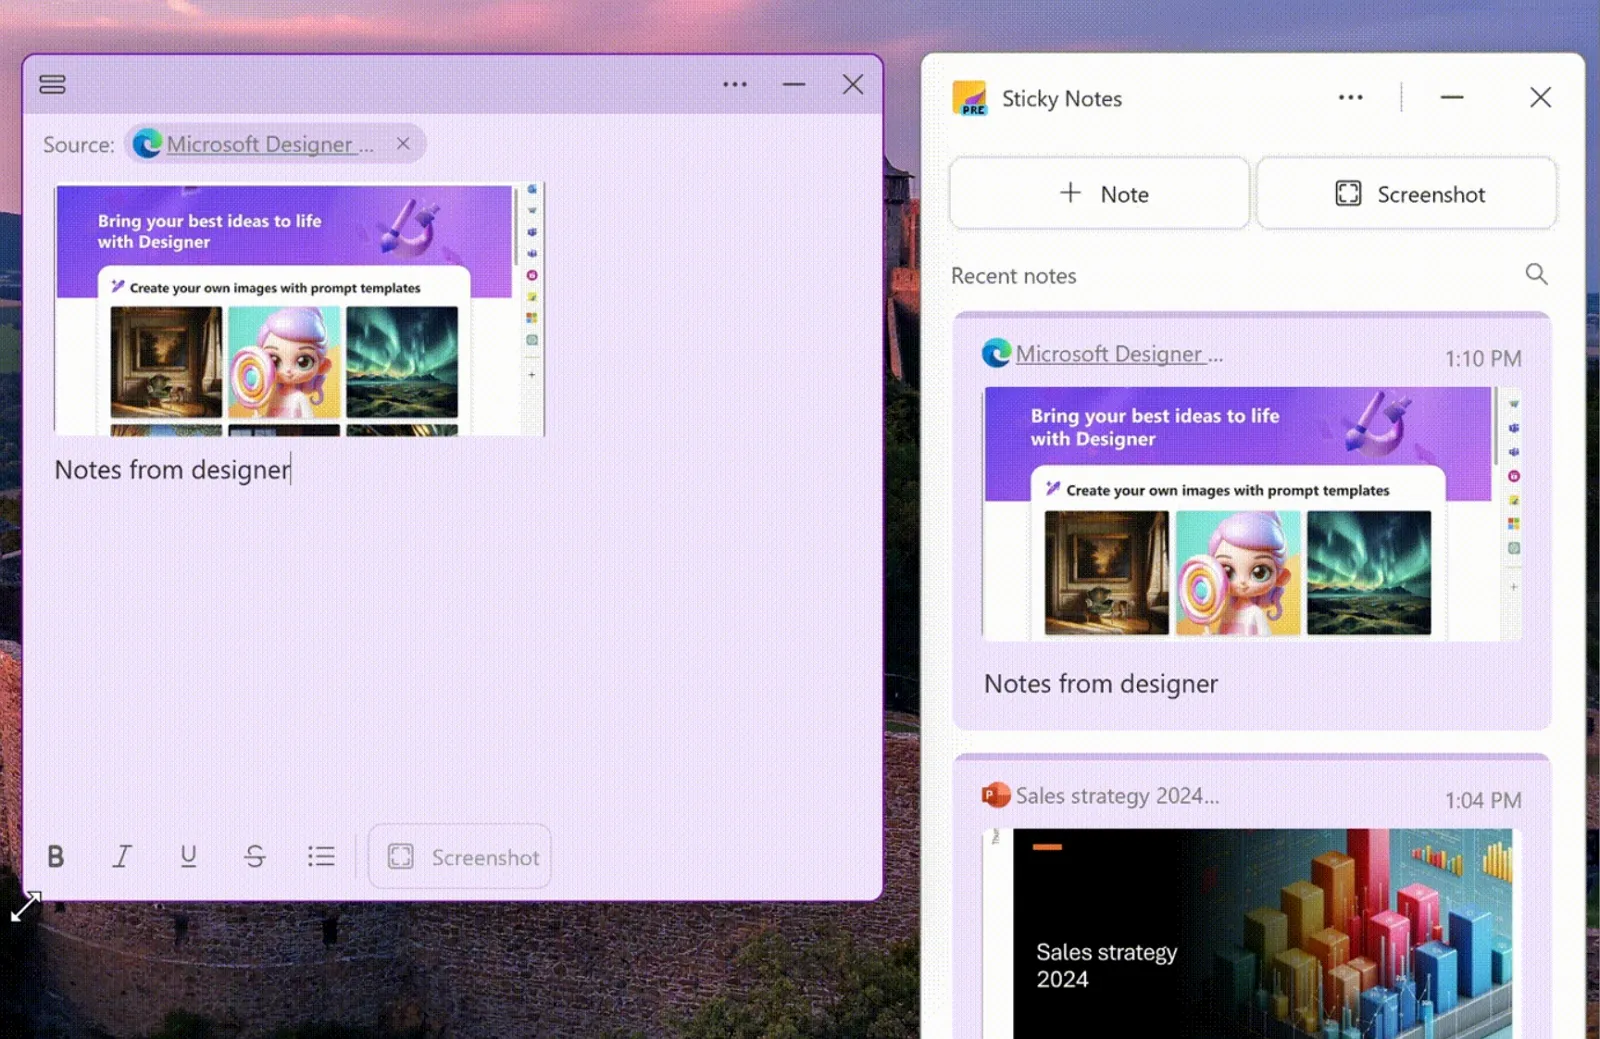 Windows 11 has a new Sticky Notes app, and you can try it now